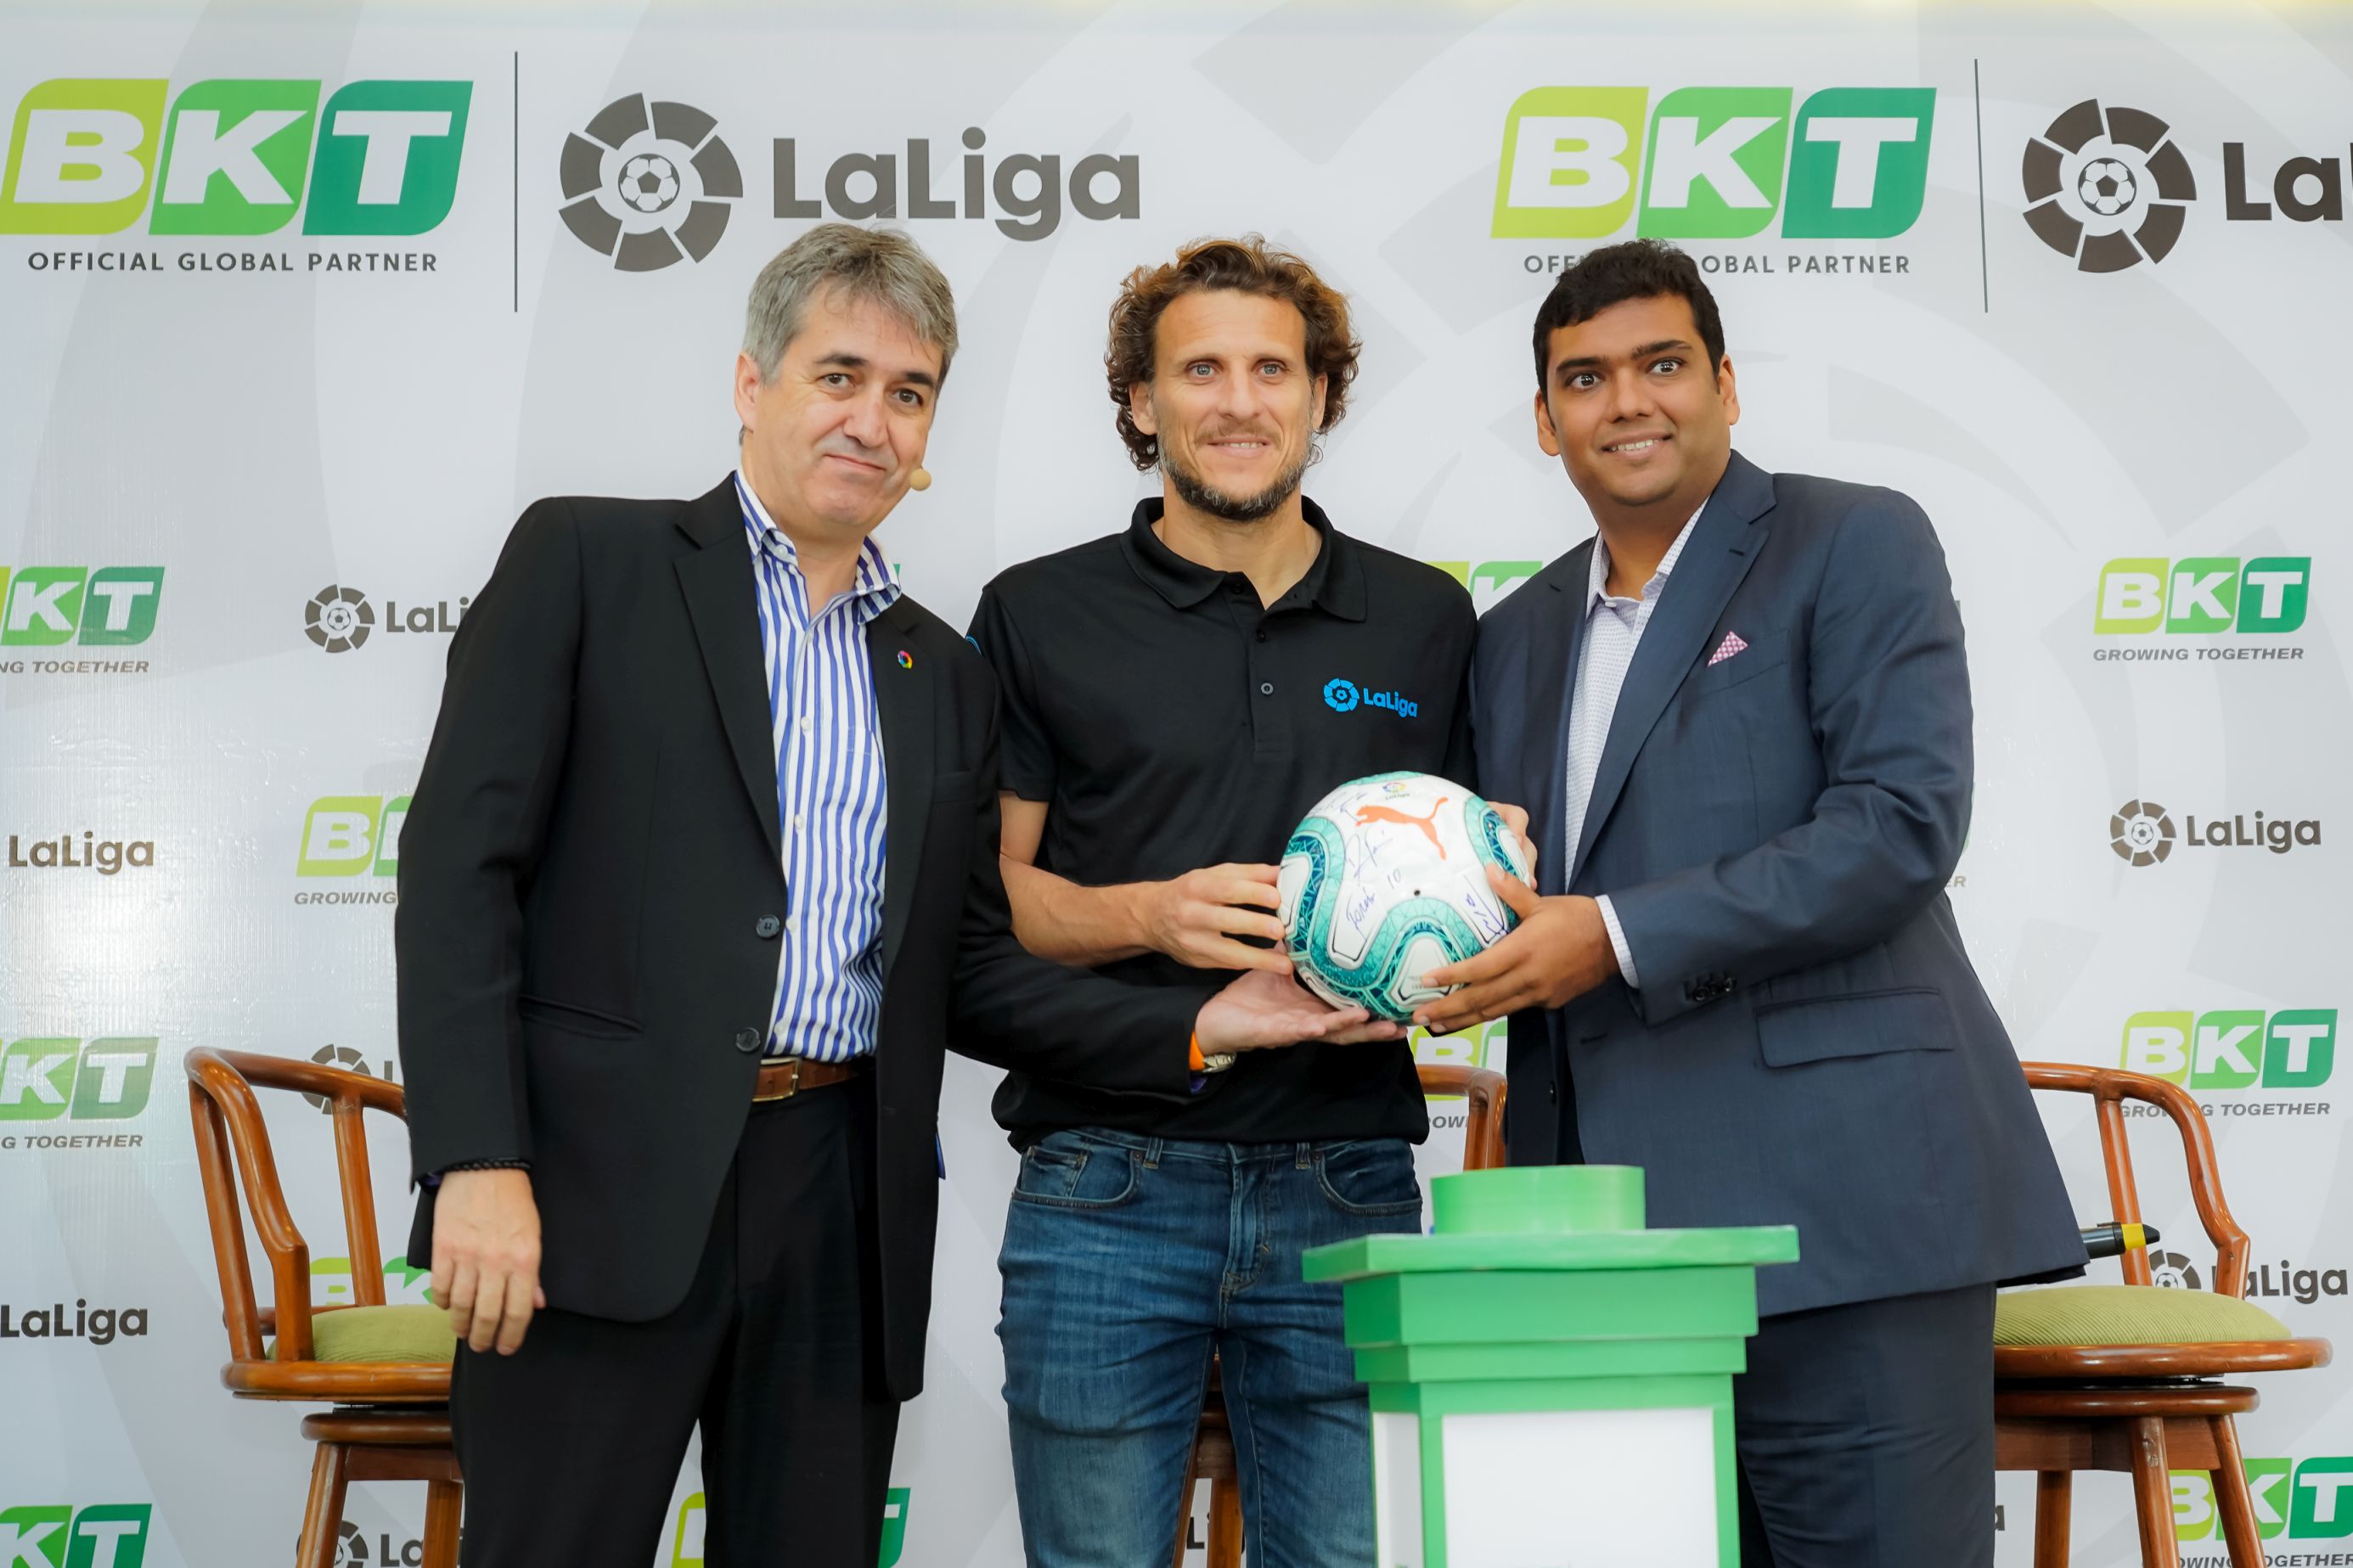 Football legend and LaLiga Ambassador Diego Forlan flanked by Mr. Rajiv Poddar and Mr. Jose Antonio Cachaza at the partnership announcement that will see BKT as “Official Global Partner of LaLiga” for three years until the end of the 2021/2022 season in Mumbai - Photo By Sachin Murdeshwar / GPN